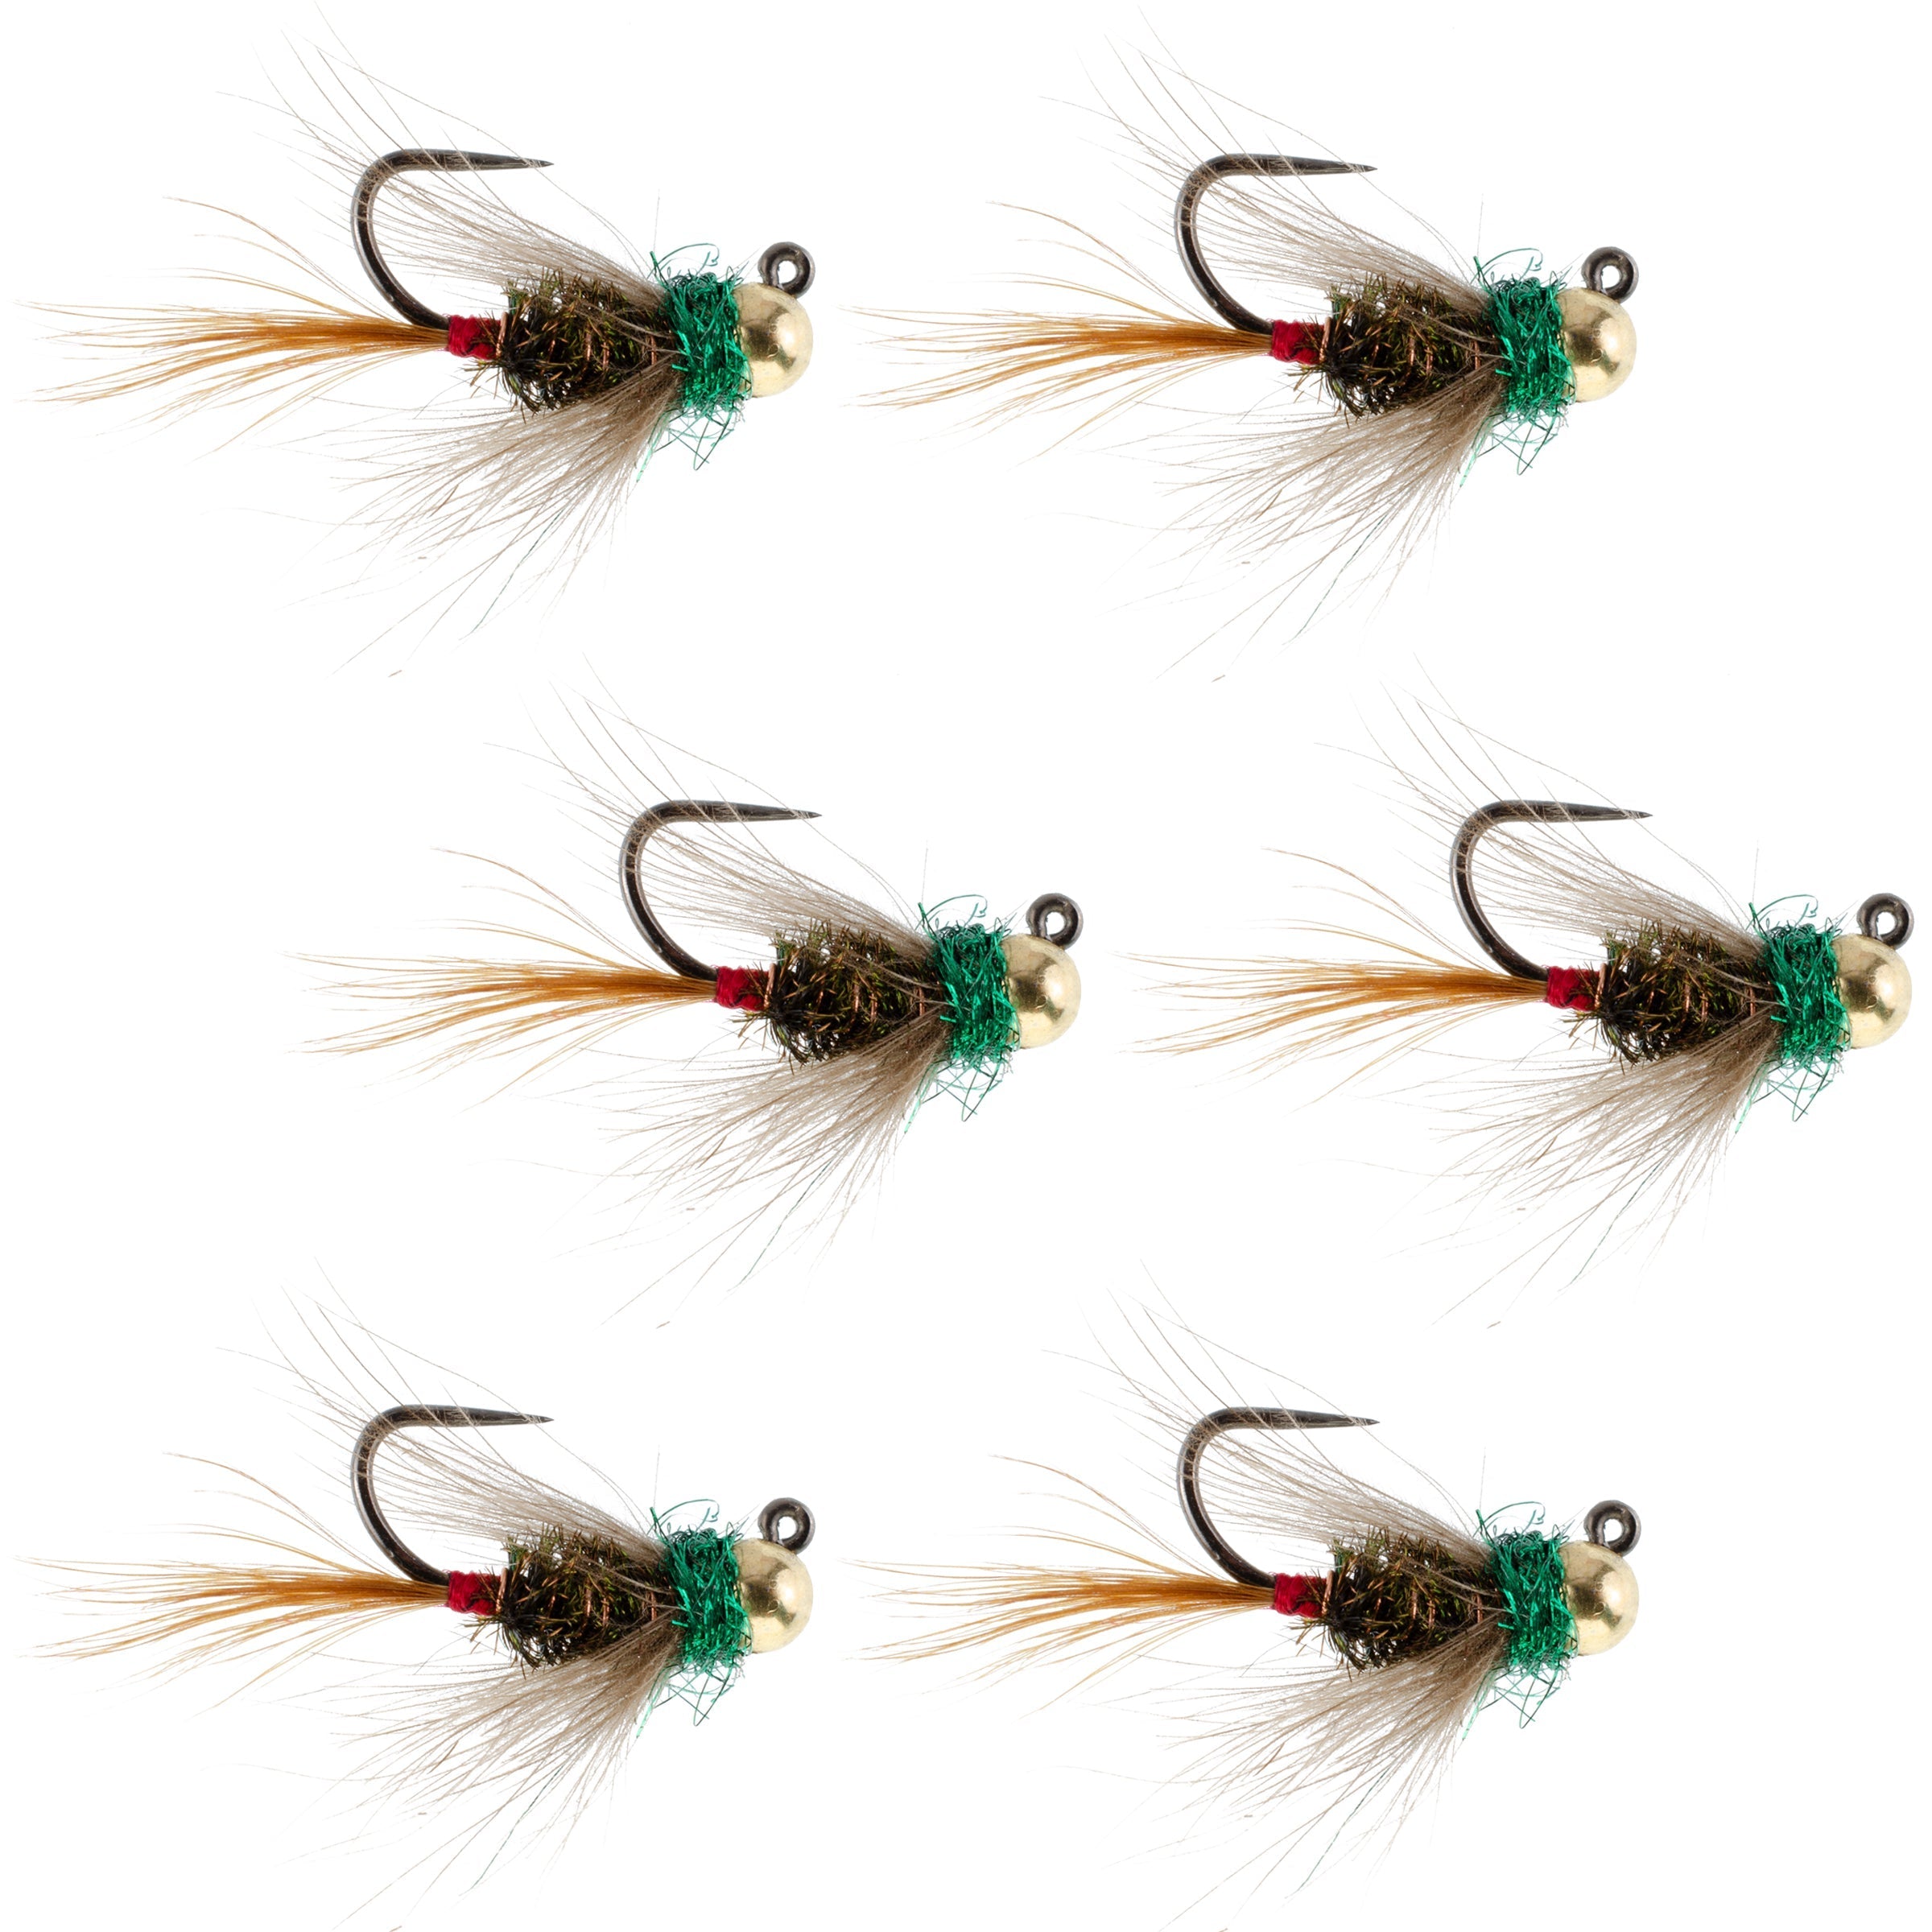 Tungsten Bead Tactical CDC Frenchie Czech Nymph Euro Nymphing Fly - 6 Flies Size 16